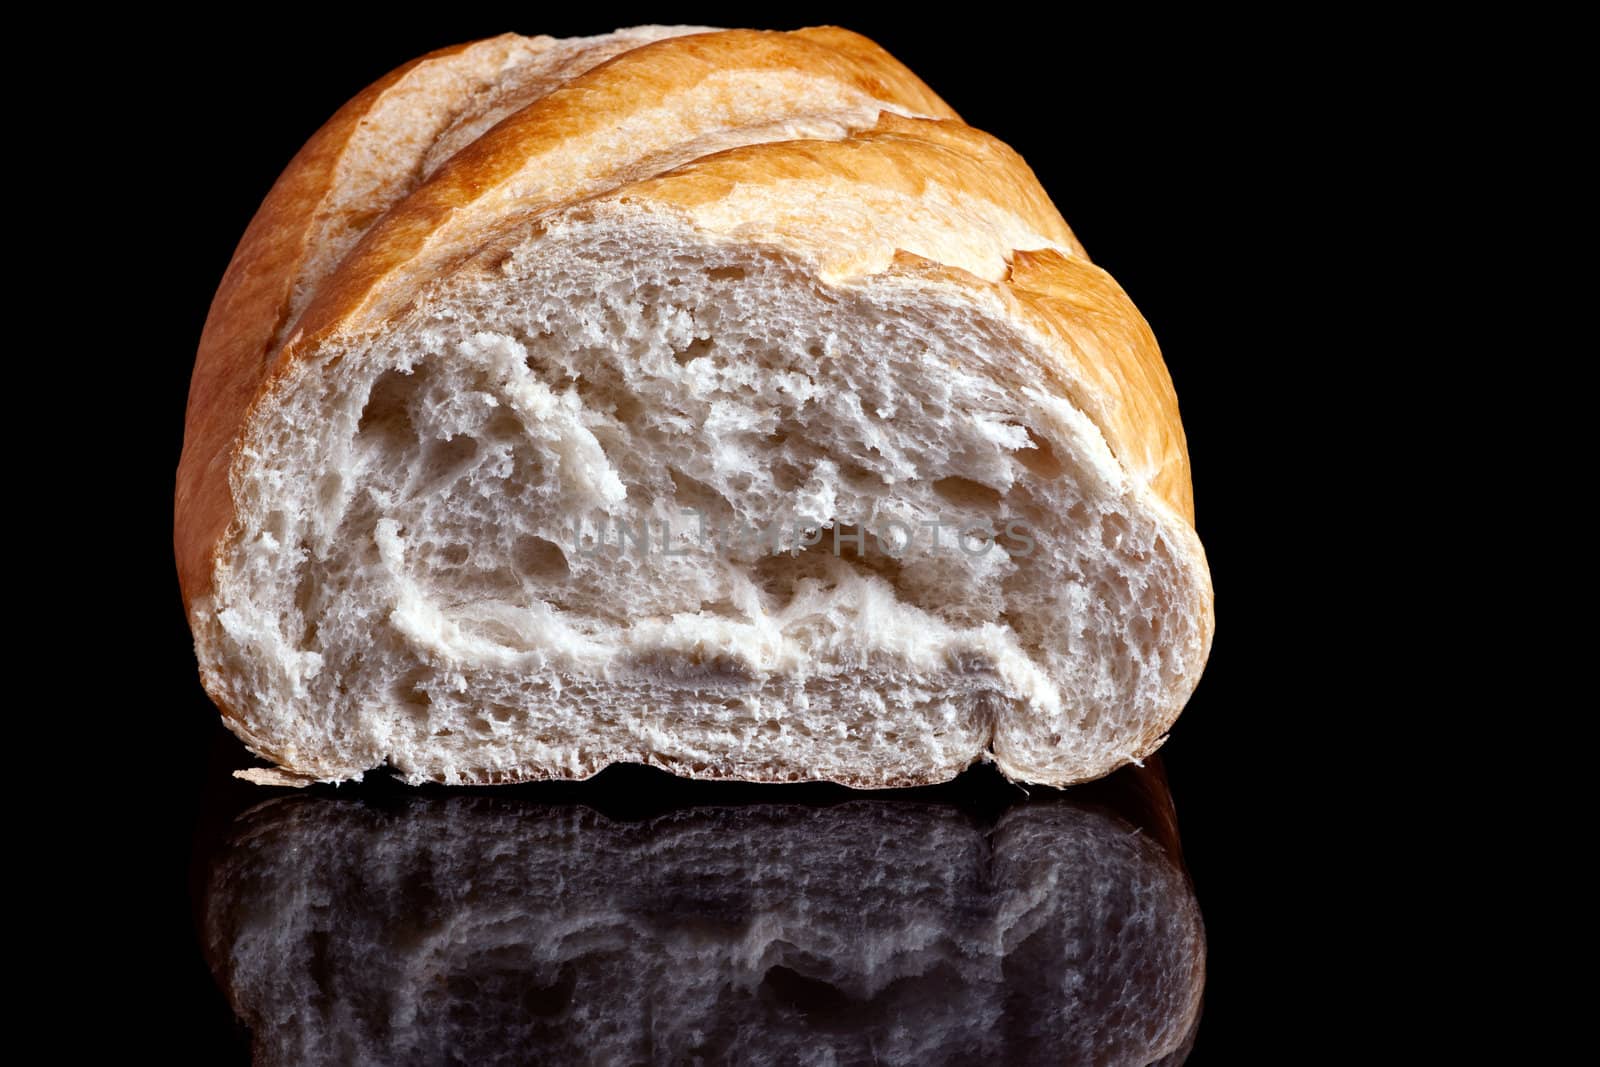 Image of a Loaf of Bread on black background